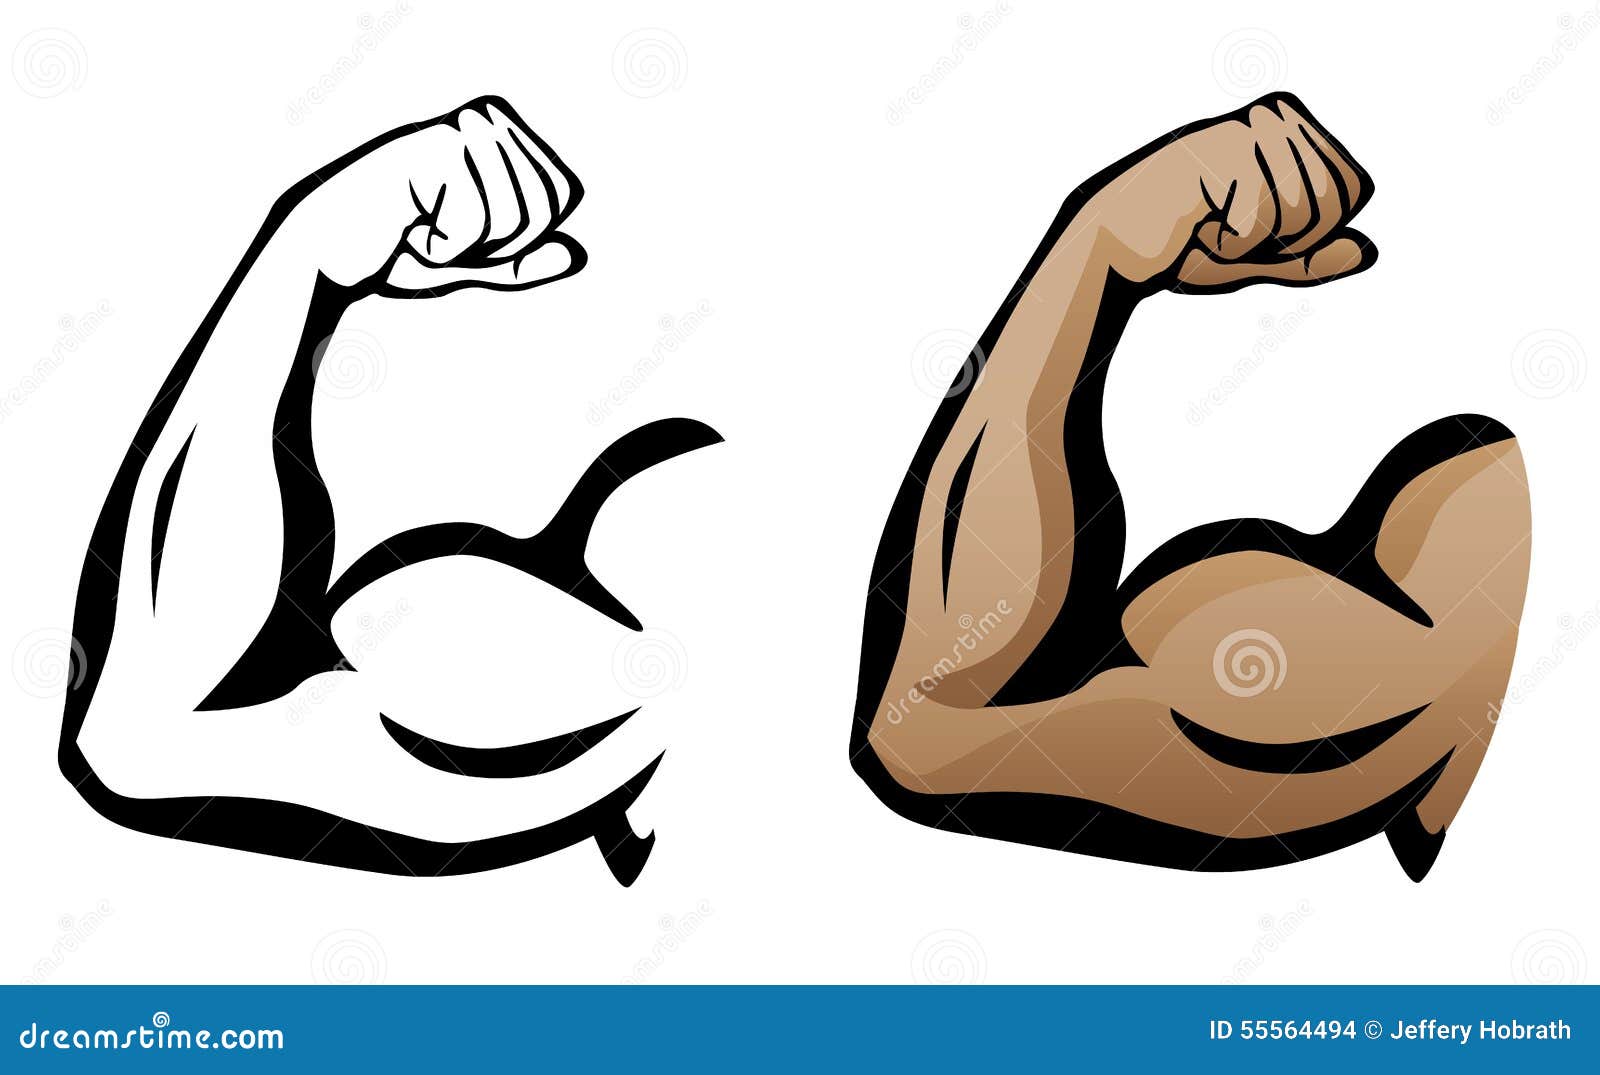 Sharp clean illustration of arm flexing with large muscles, both as a 